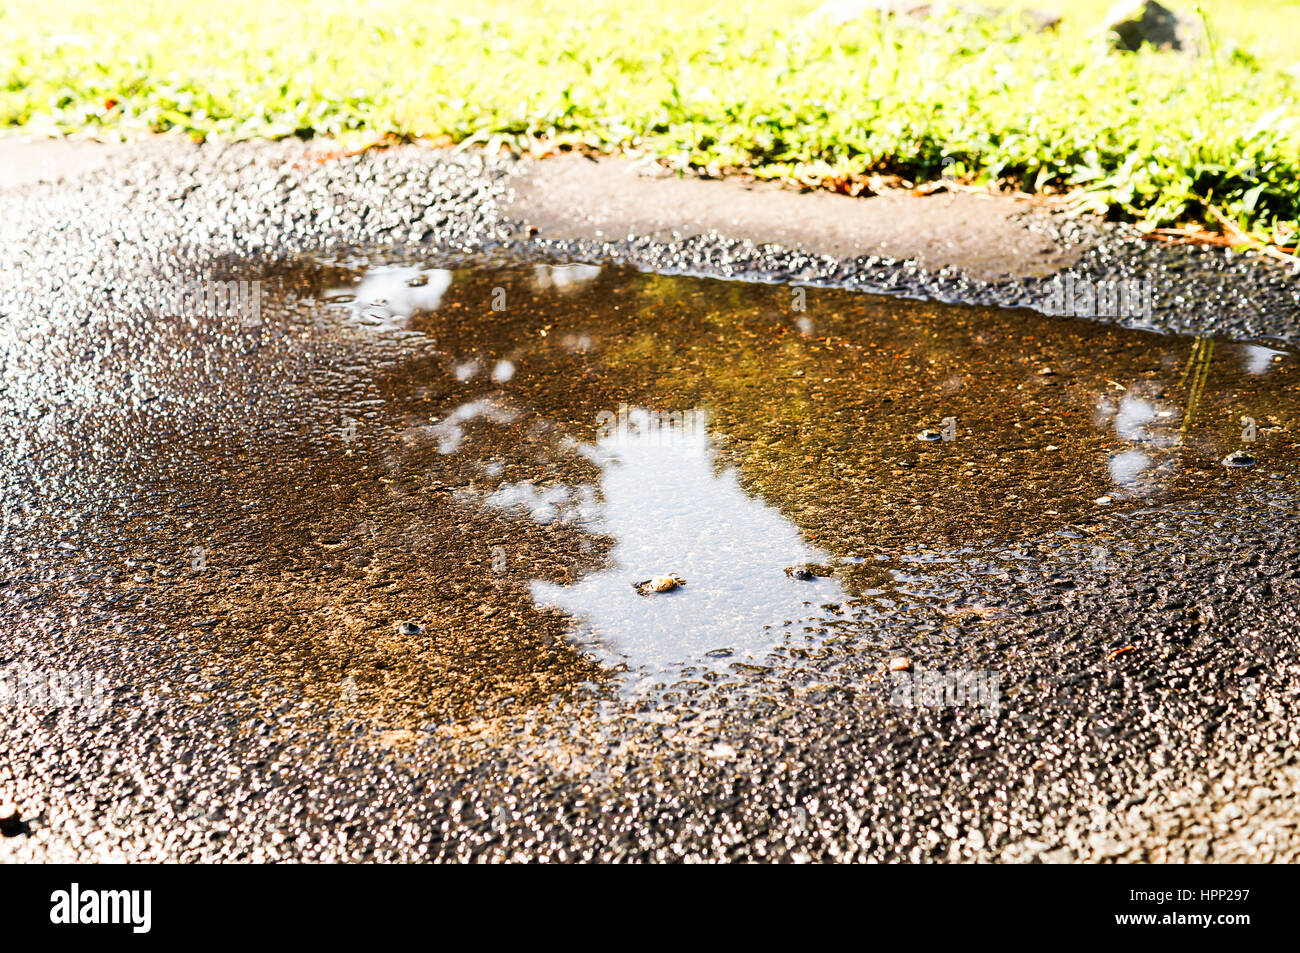 Concrete walkway that is wet with rain water Stock Photo